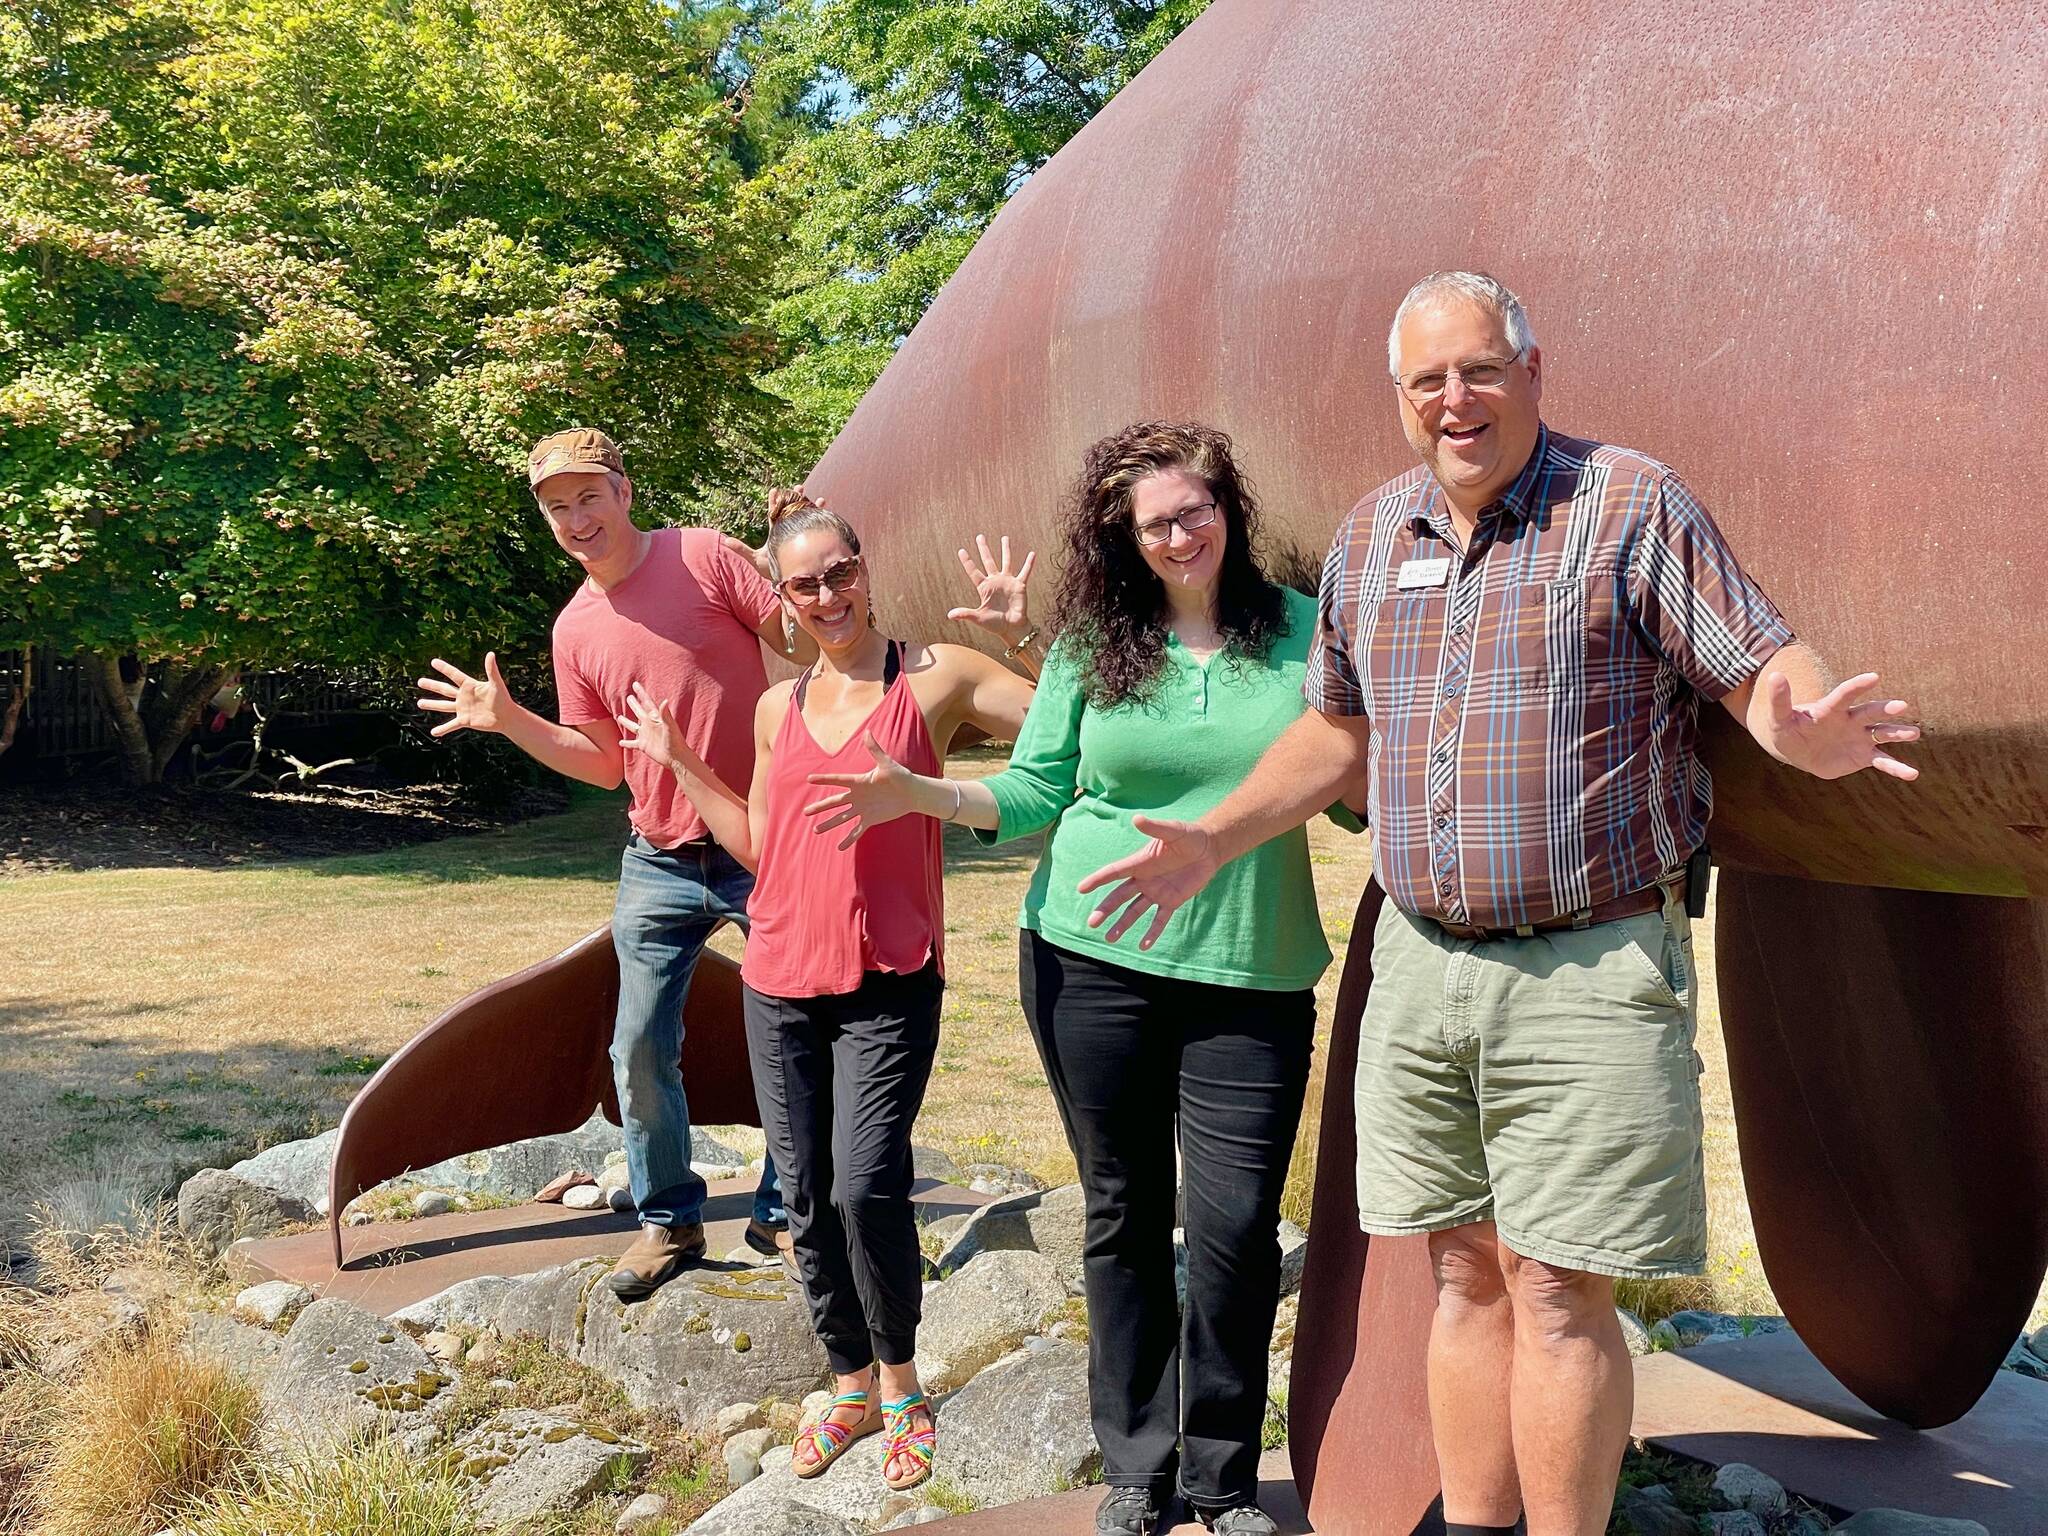 Ed Andrews photo
Left to right: Orcas Center Artistic Director Jake Perrine, Membership Director Nicole Matisse, Communications Director Bethany Marie and Executive Director Dimitri Stankevich in front of the Orcas Center whale sculpture.